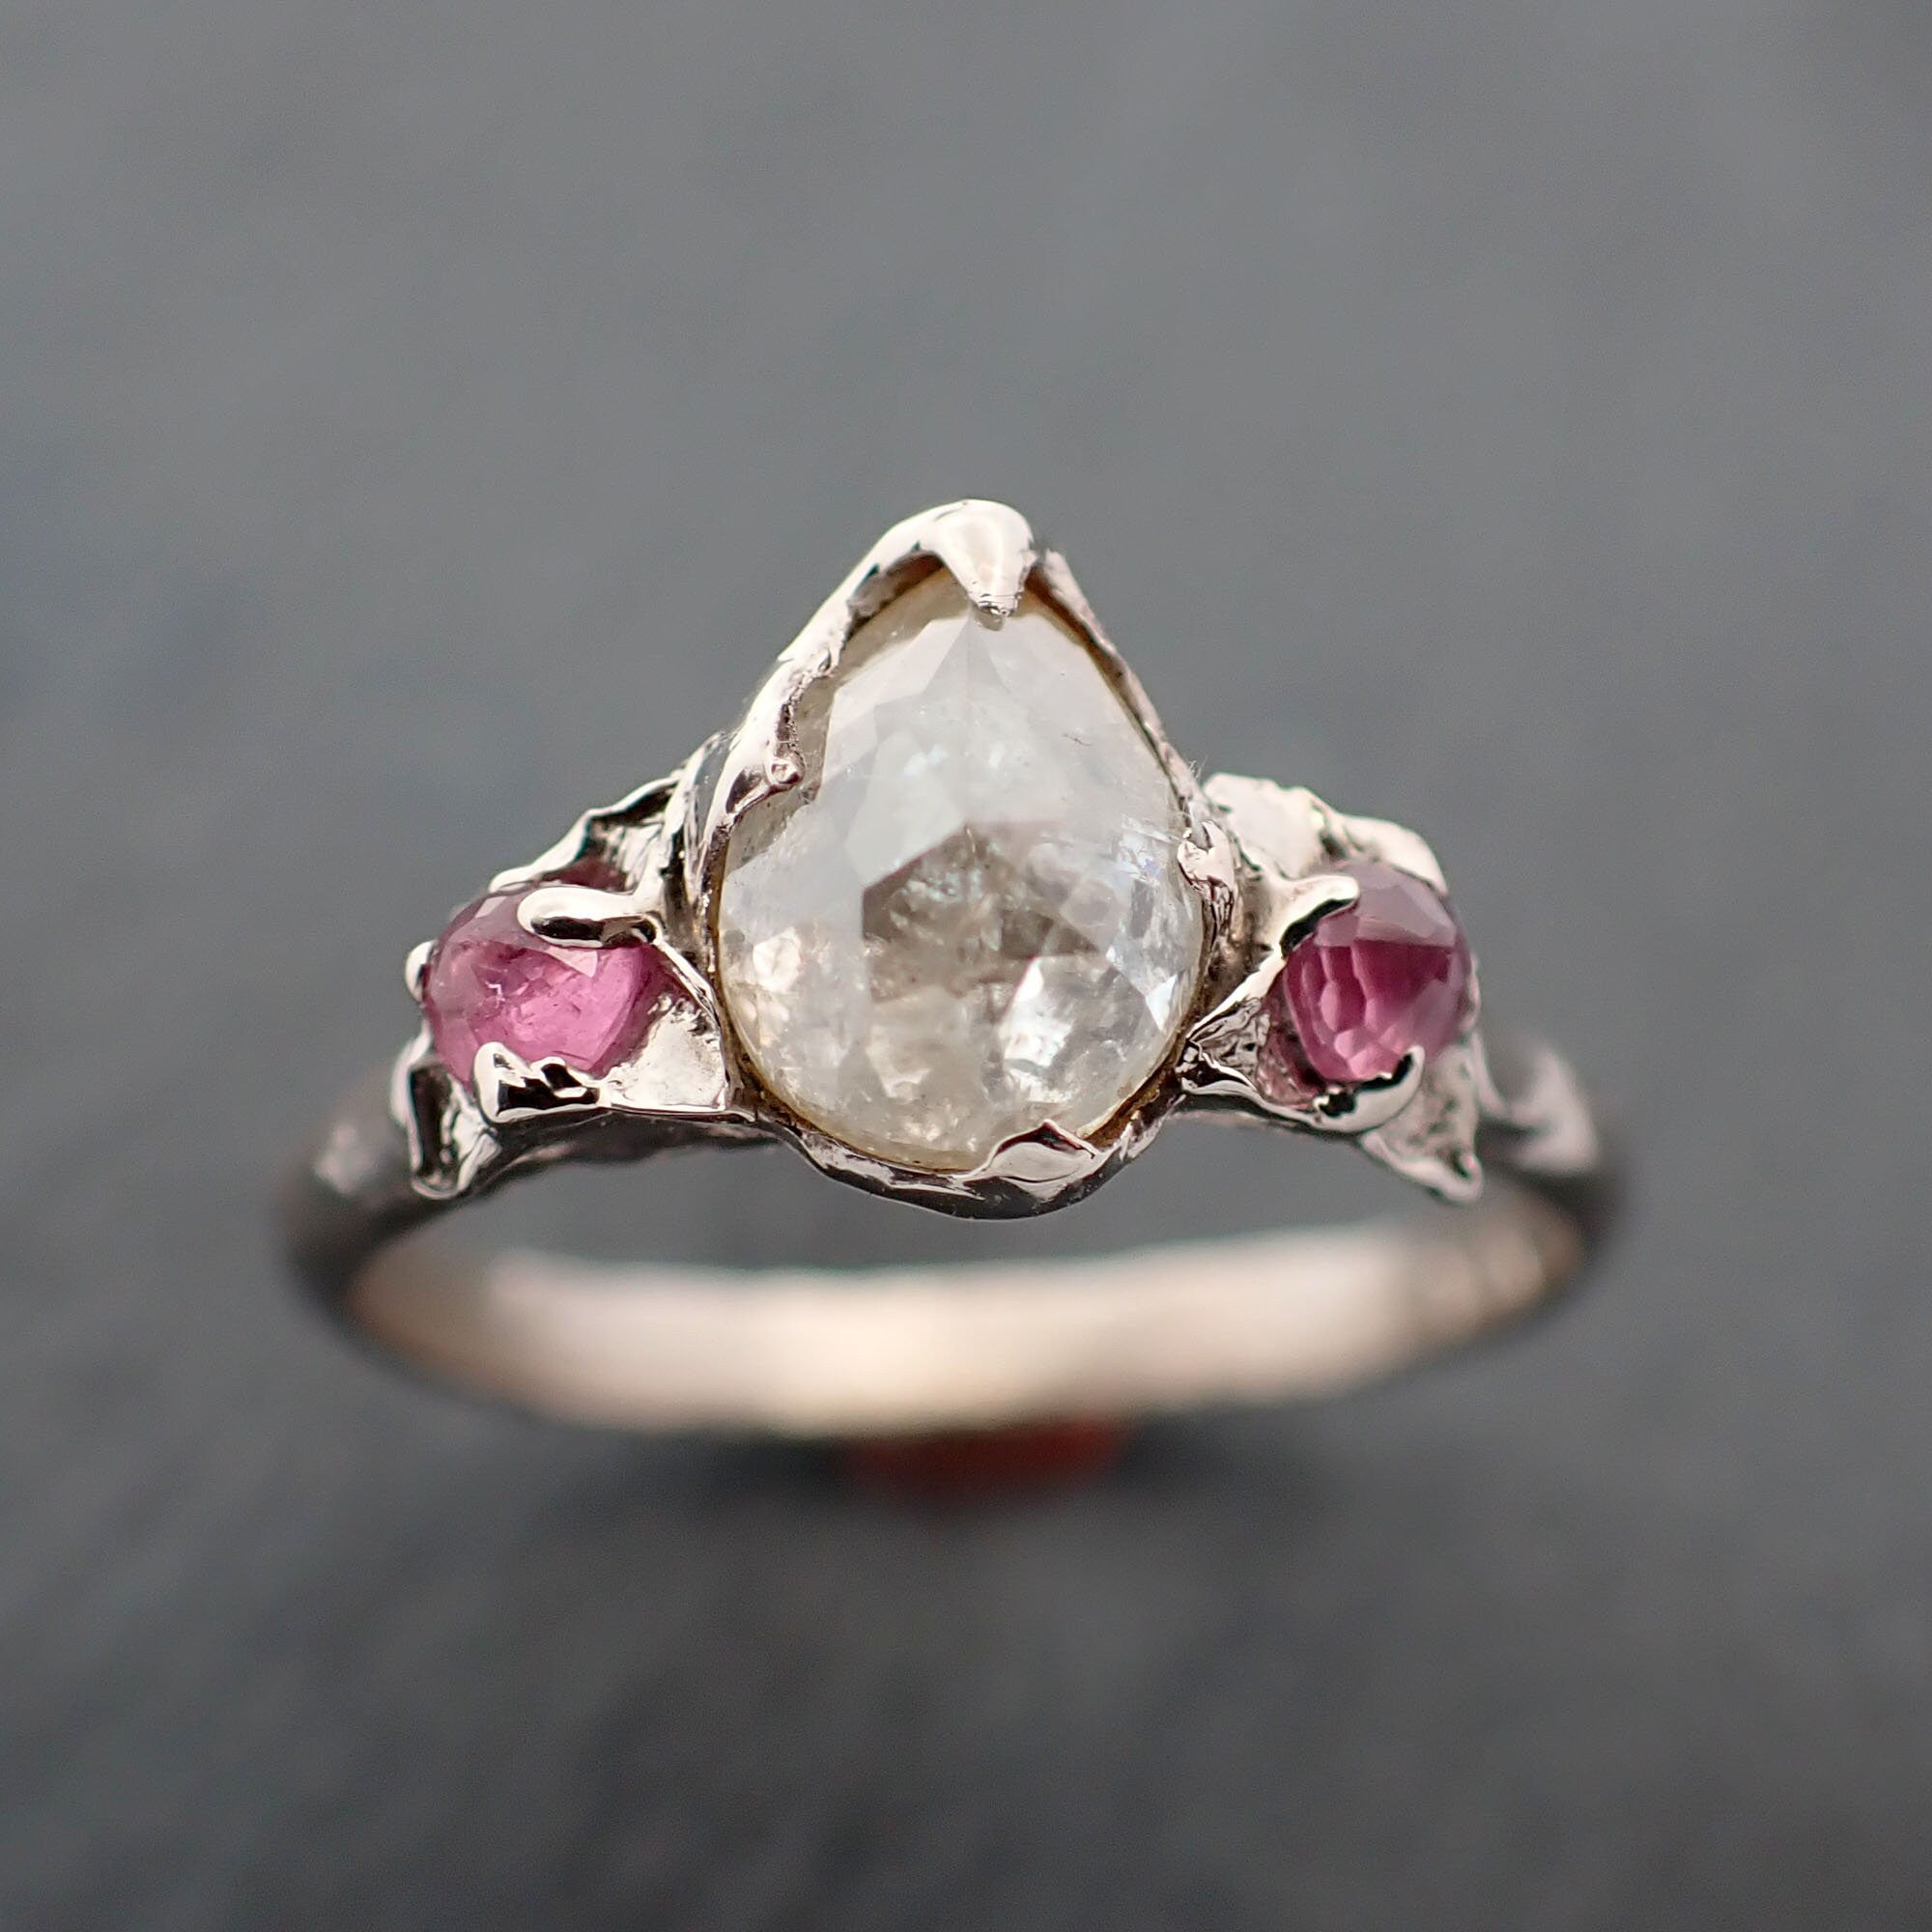 Faceted Fancy cut white Diamond and ruby multi stone Engagement 14k White Gold Lilac setting Wedding Ring 3395